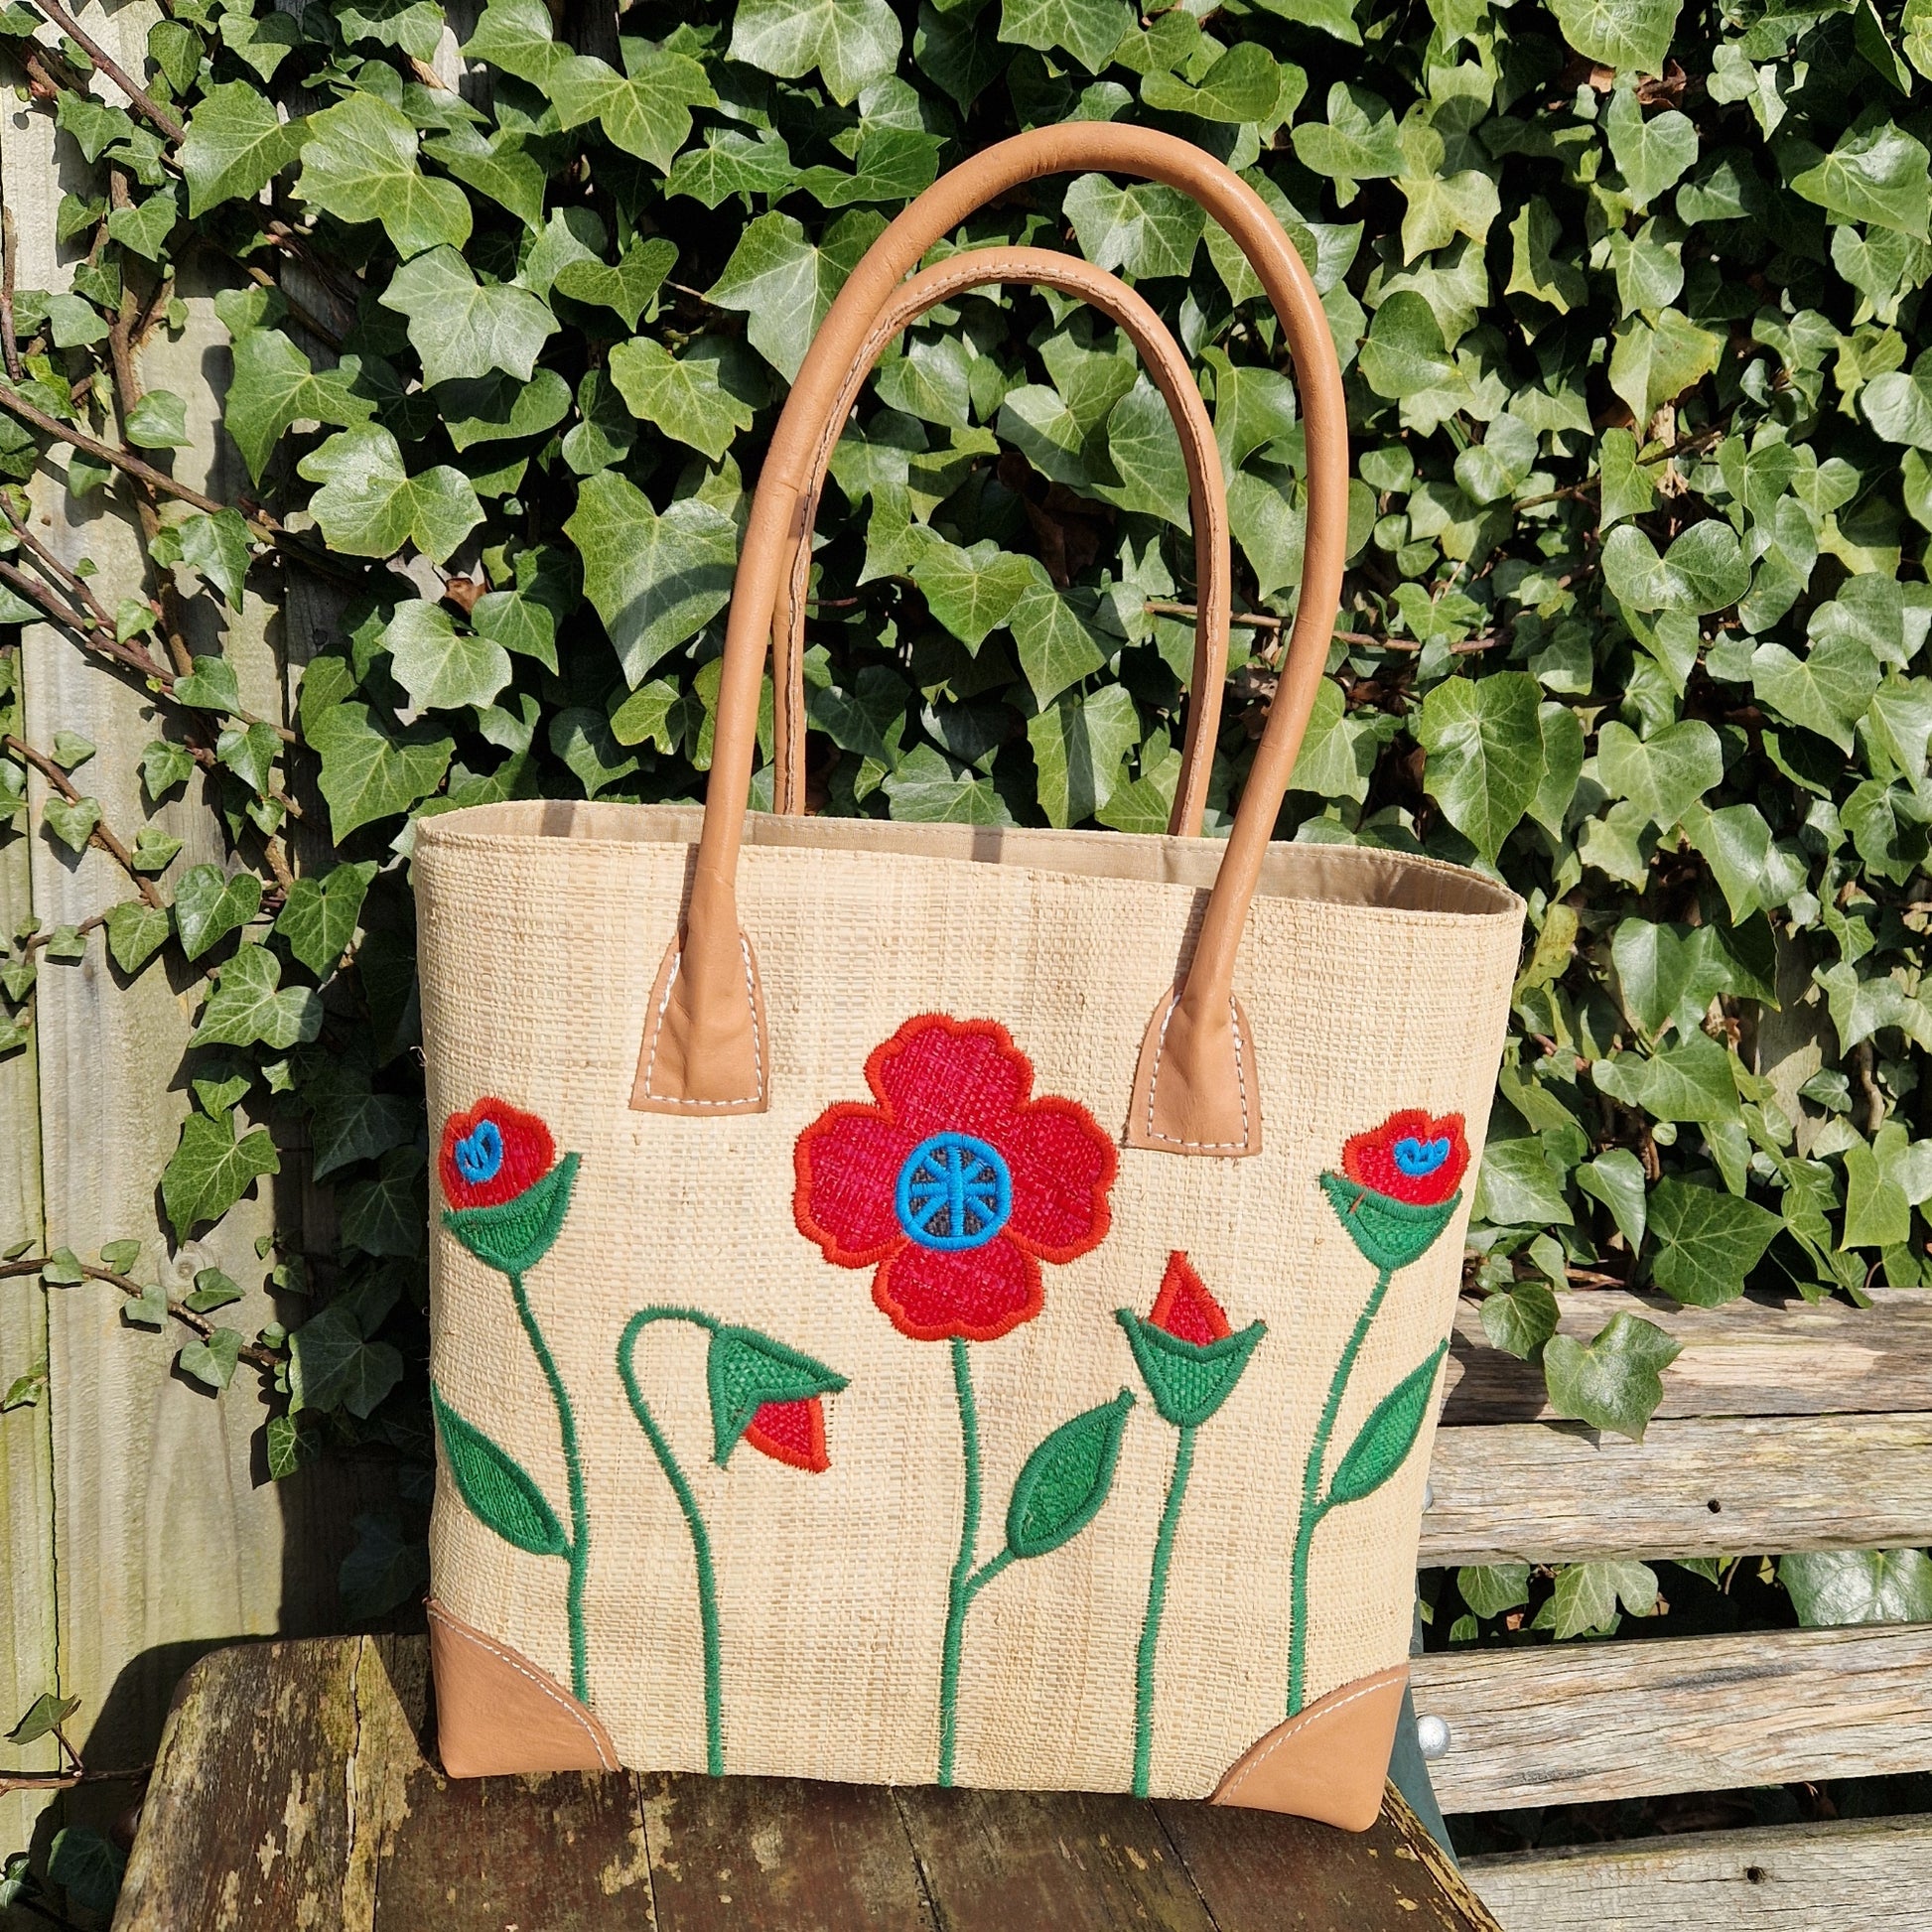 Natural Raffia Basket decorated with red poppies on the front.